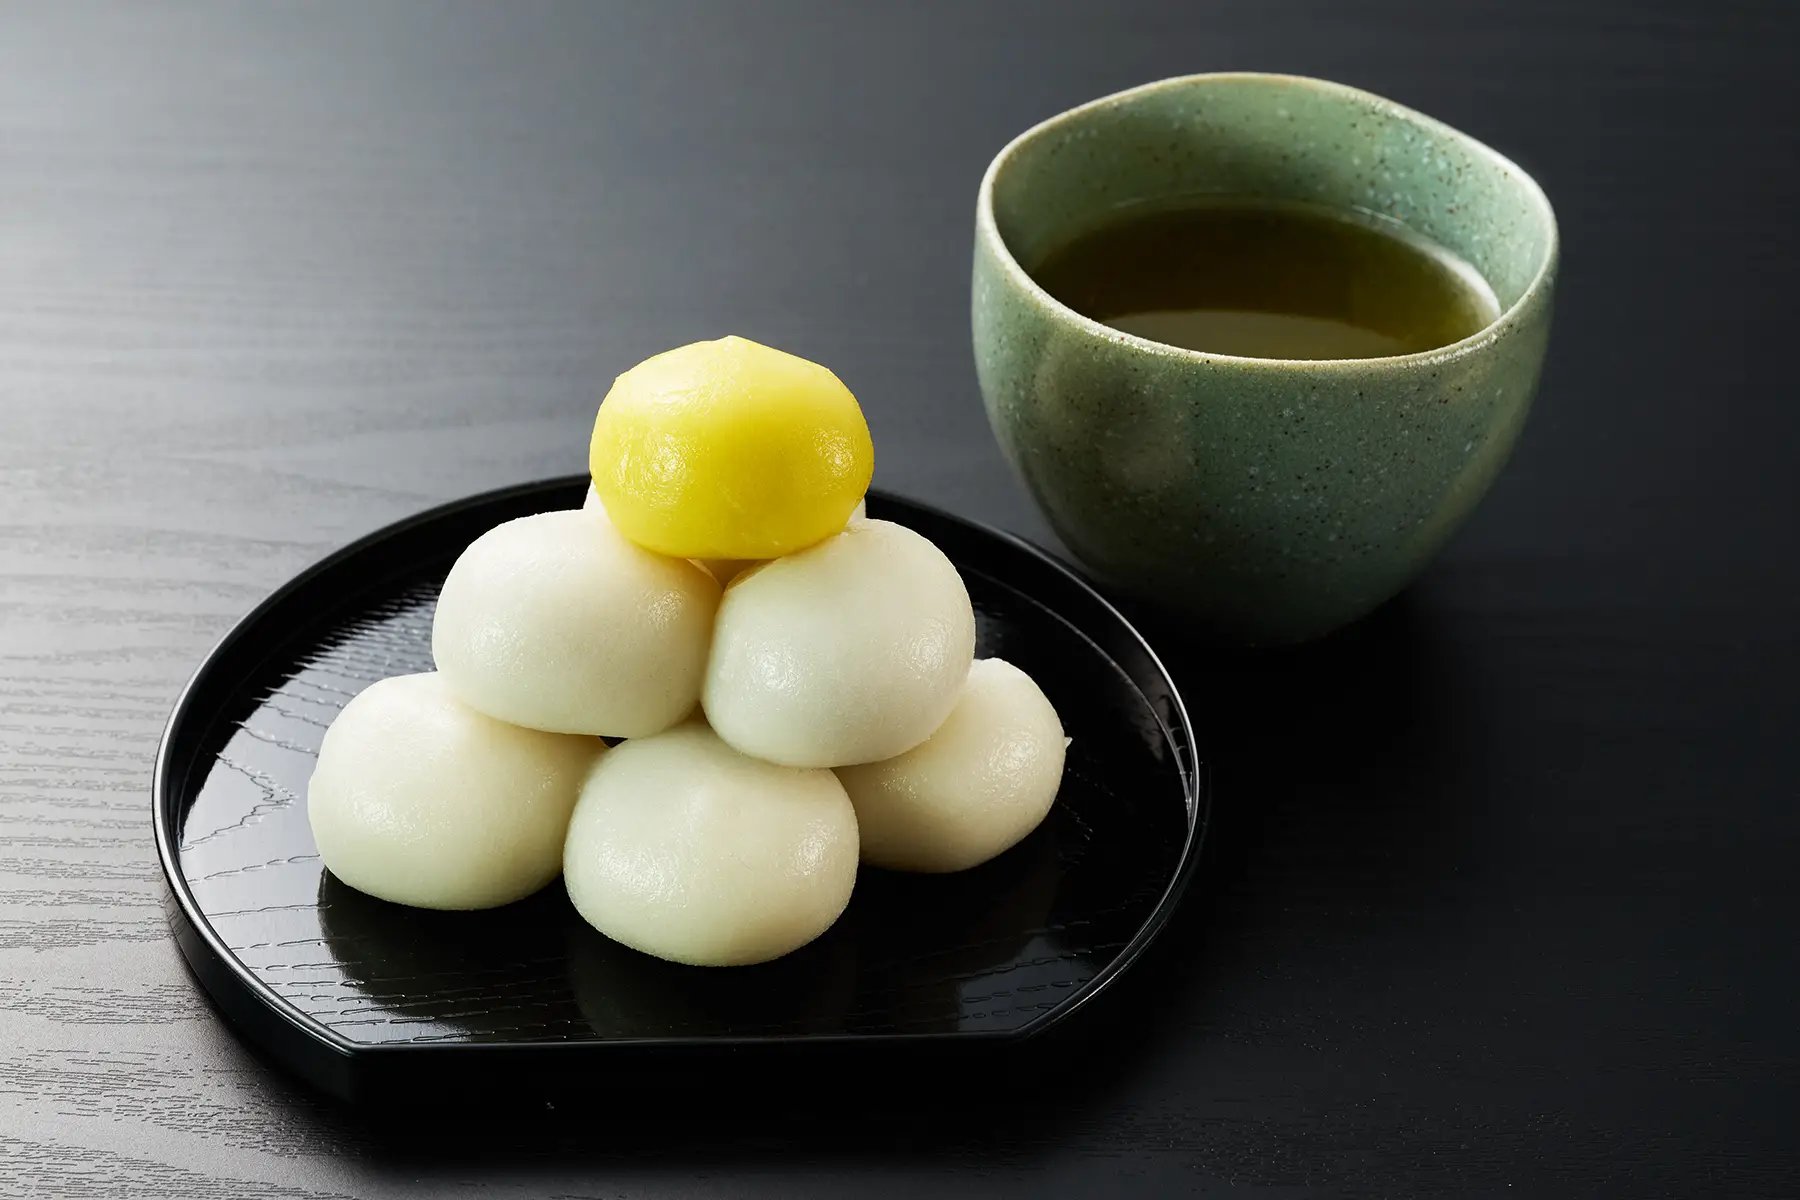 Spherical rice dumplings on a plate next to a cup of tea